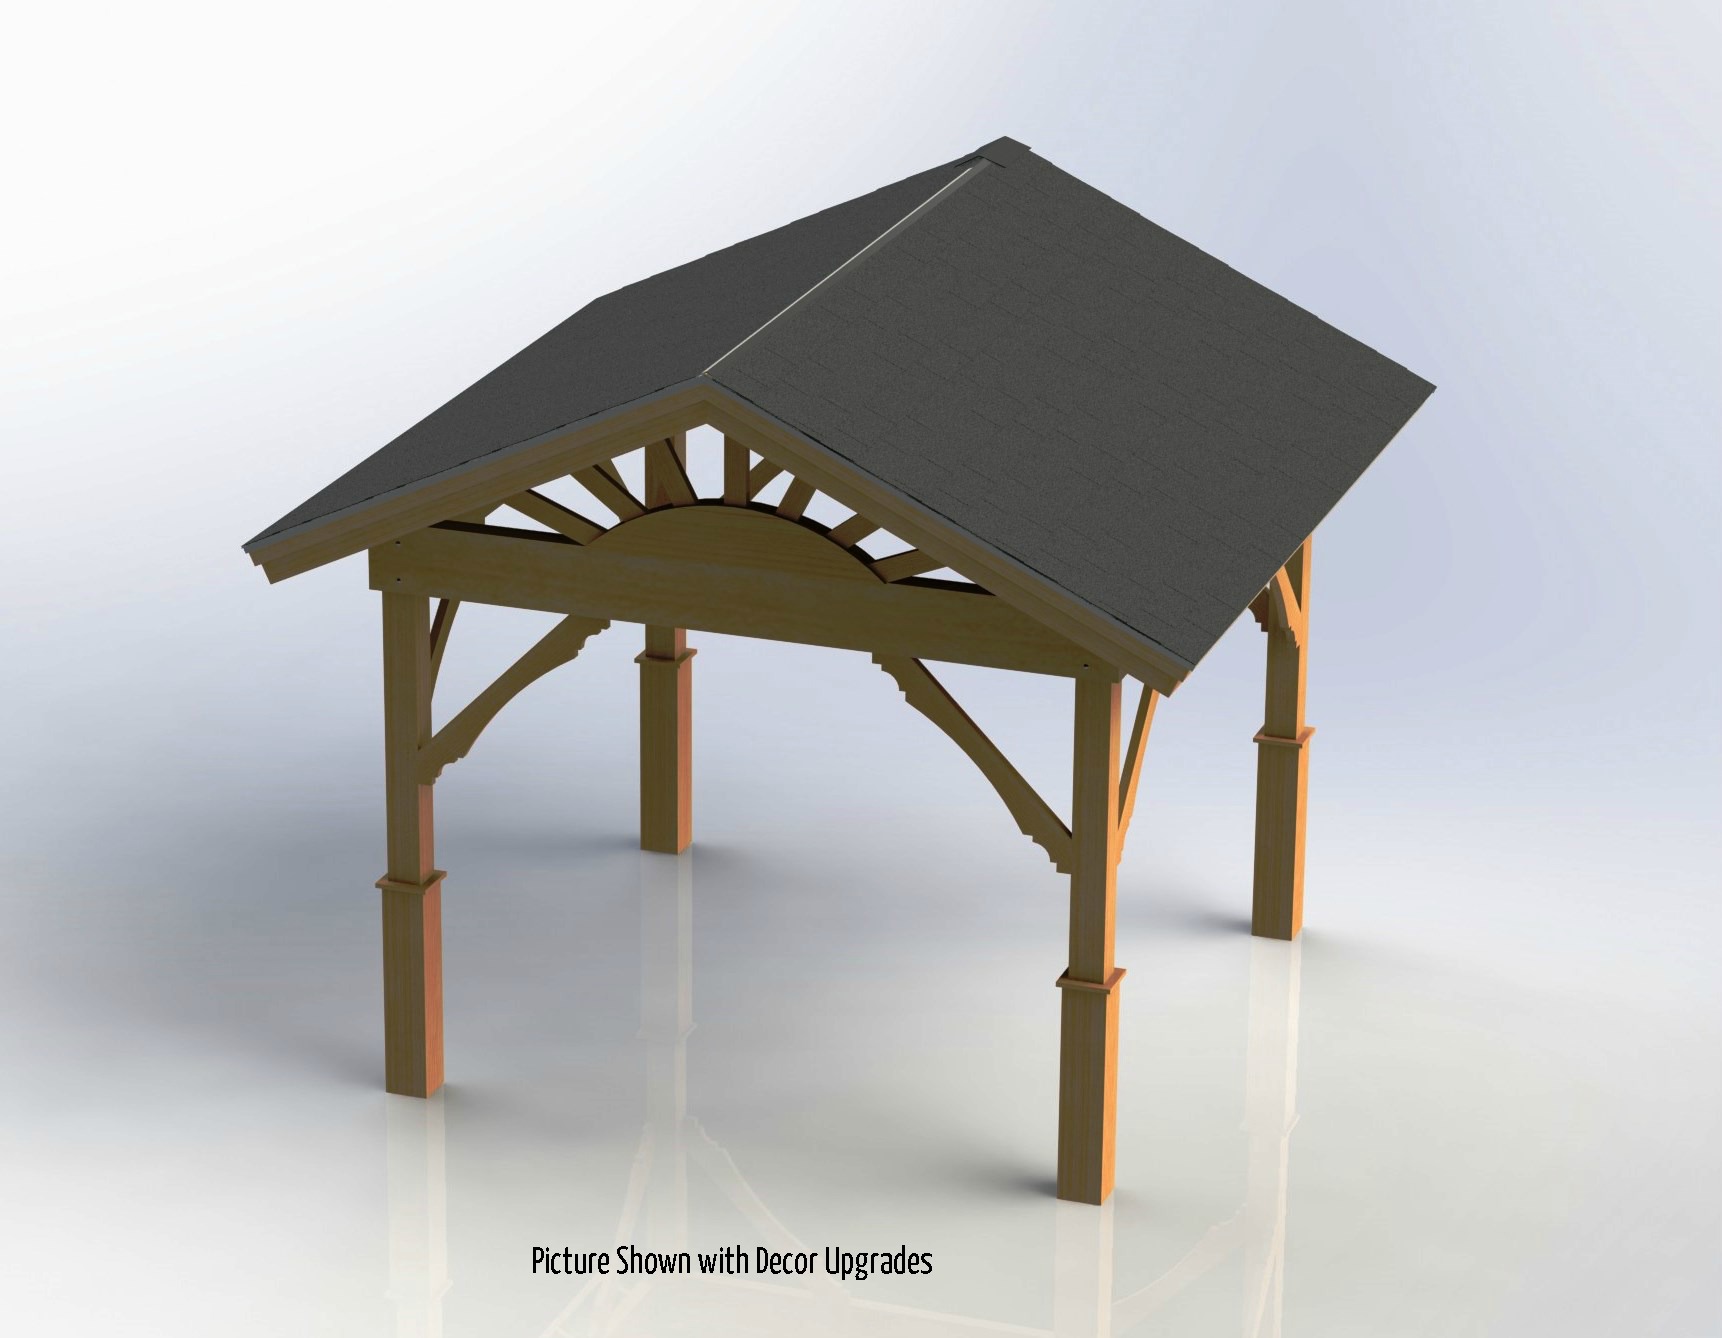 Gazebo with Gable Roof Downloadable Building Plans